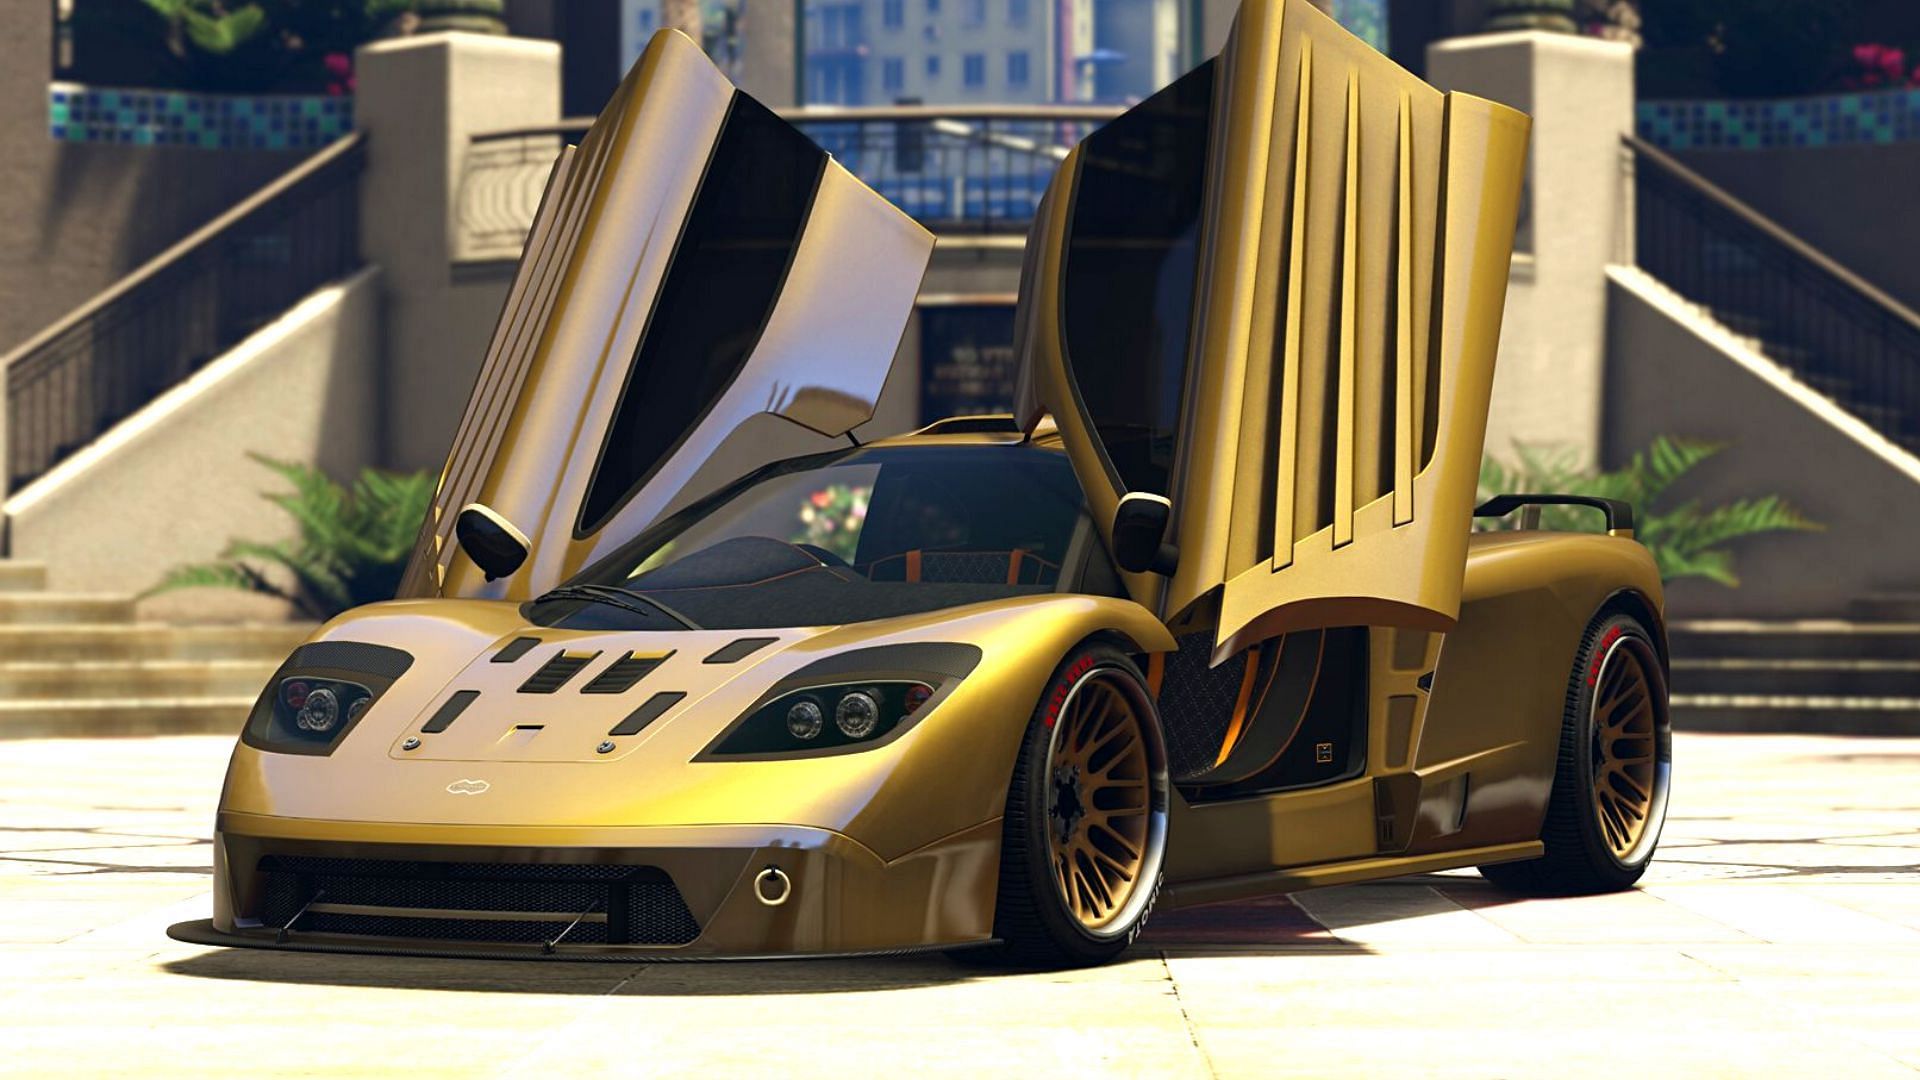 A list of five best GTA Online cars recommended for a purchase this week (September 8-14)